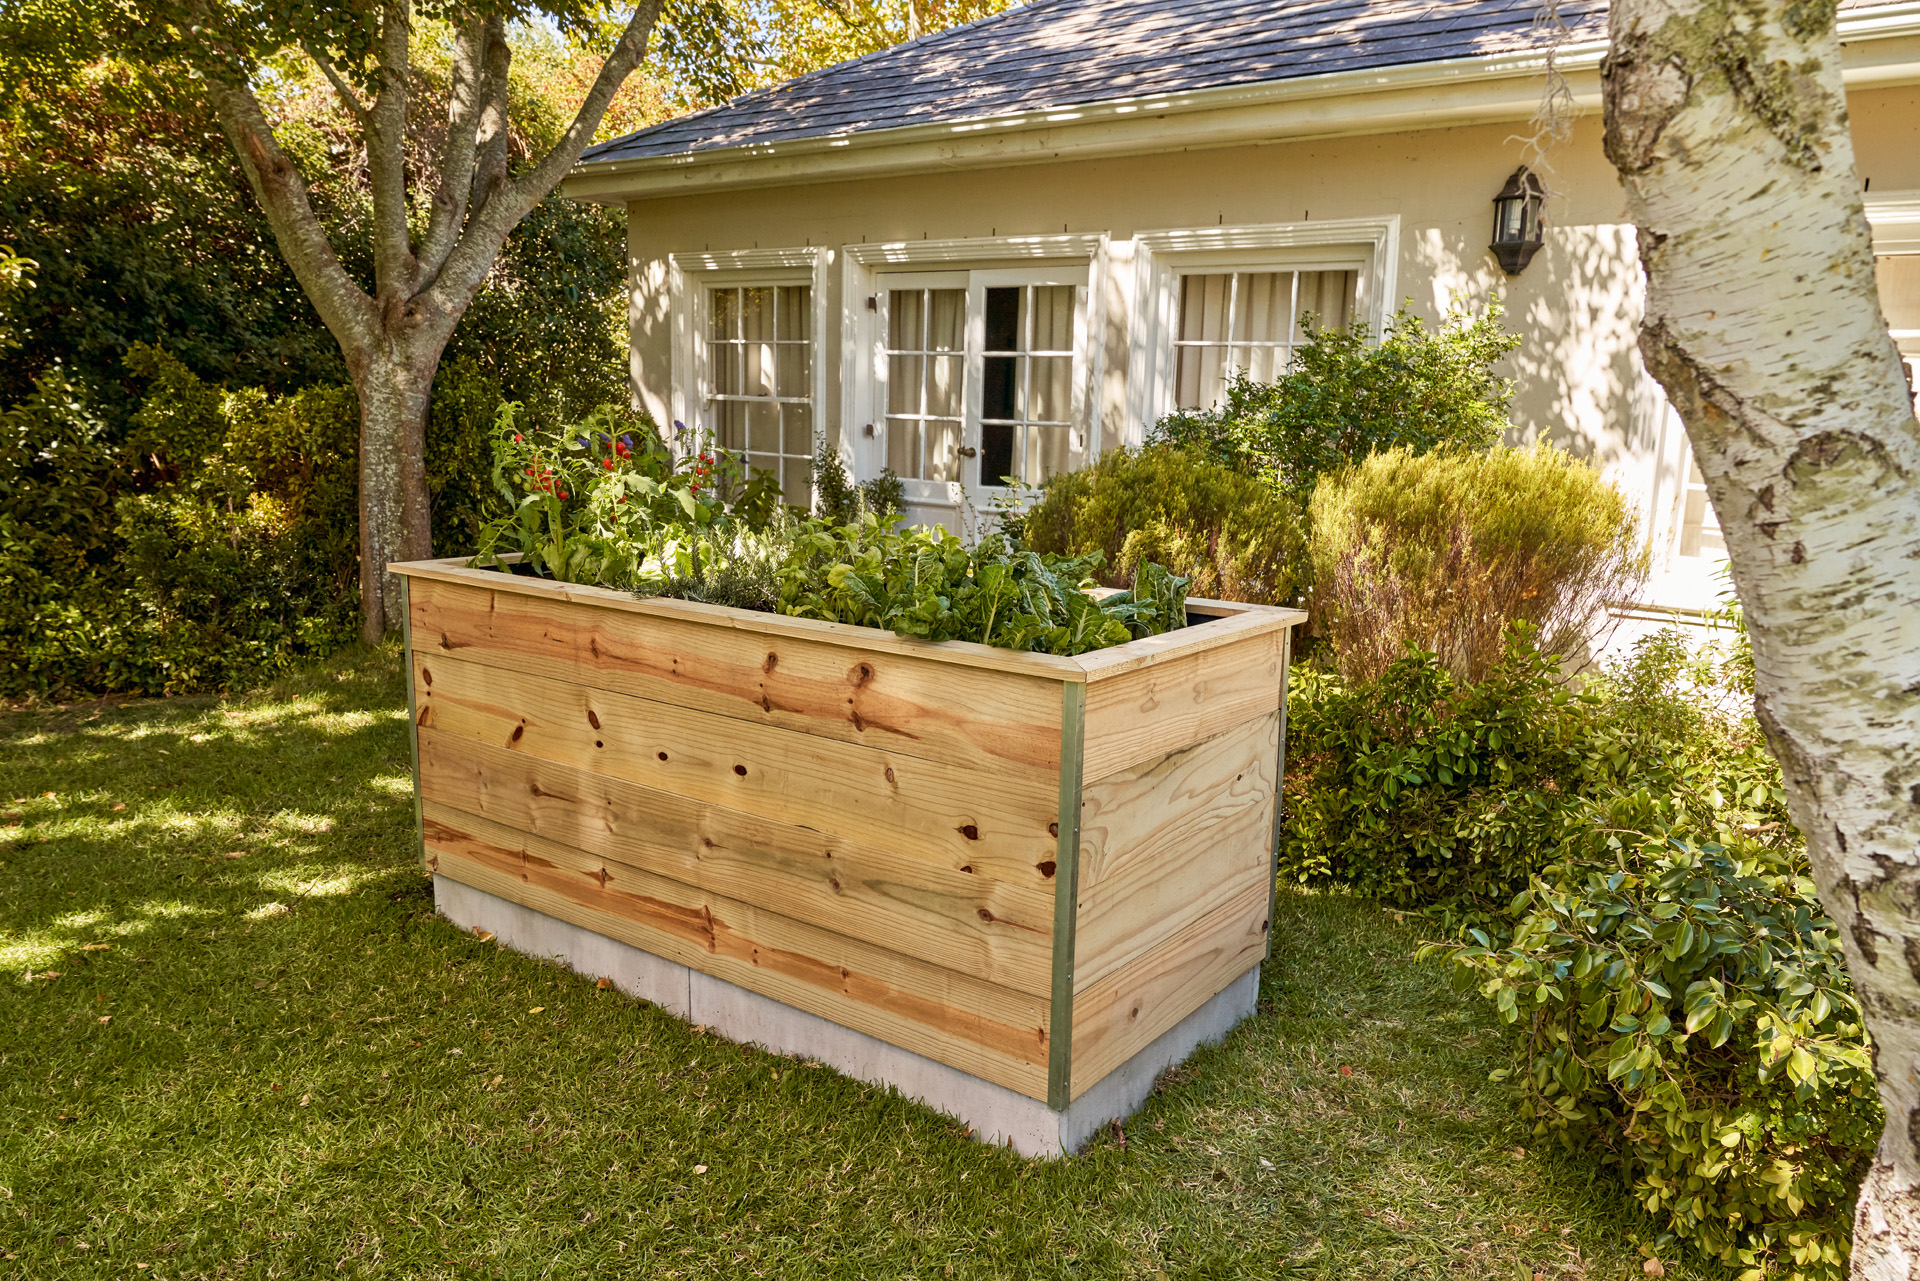 A raised planter box made from wooden planks, in a garden in front of a house